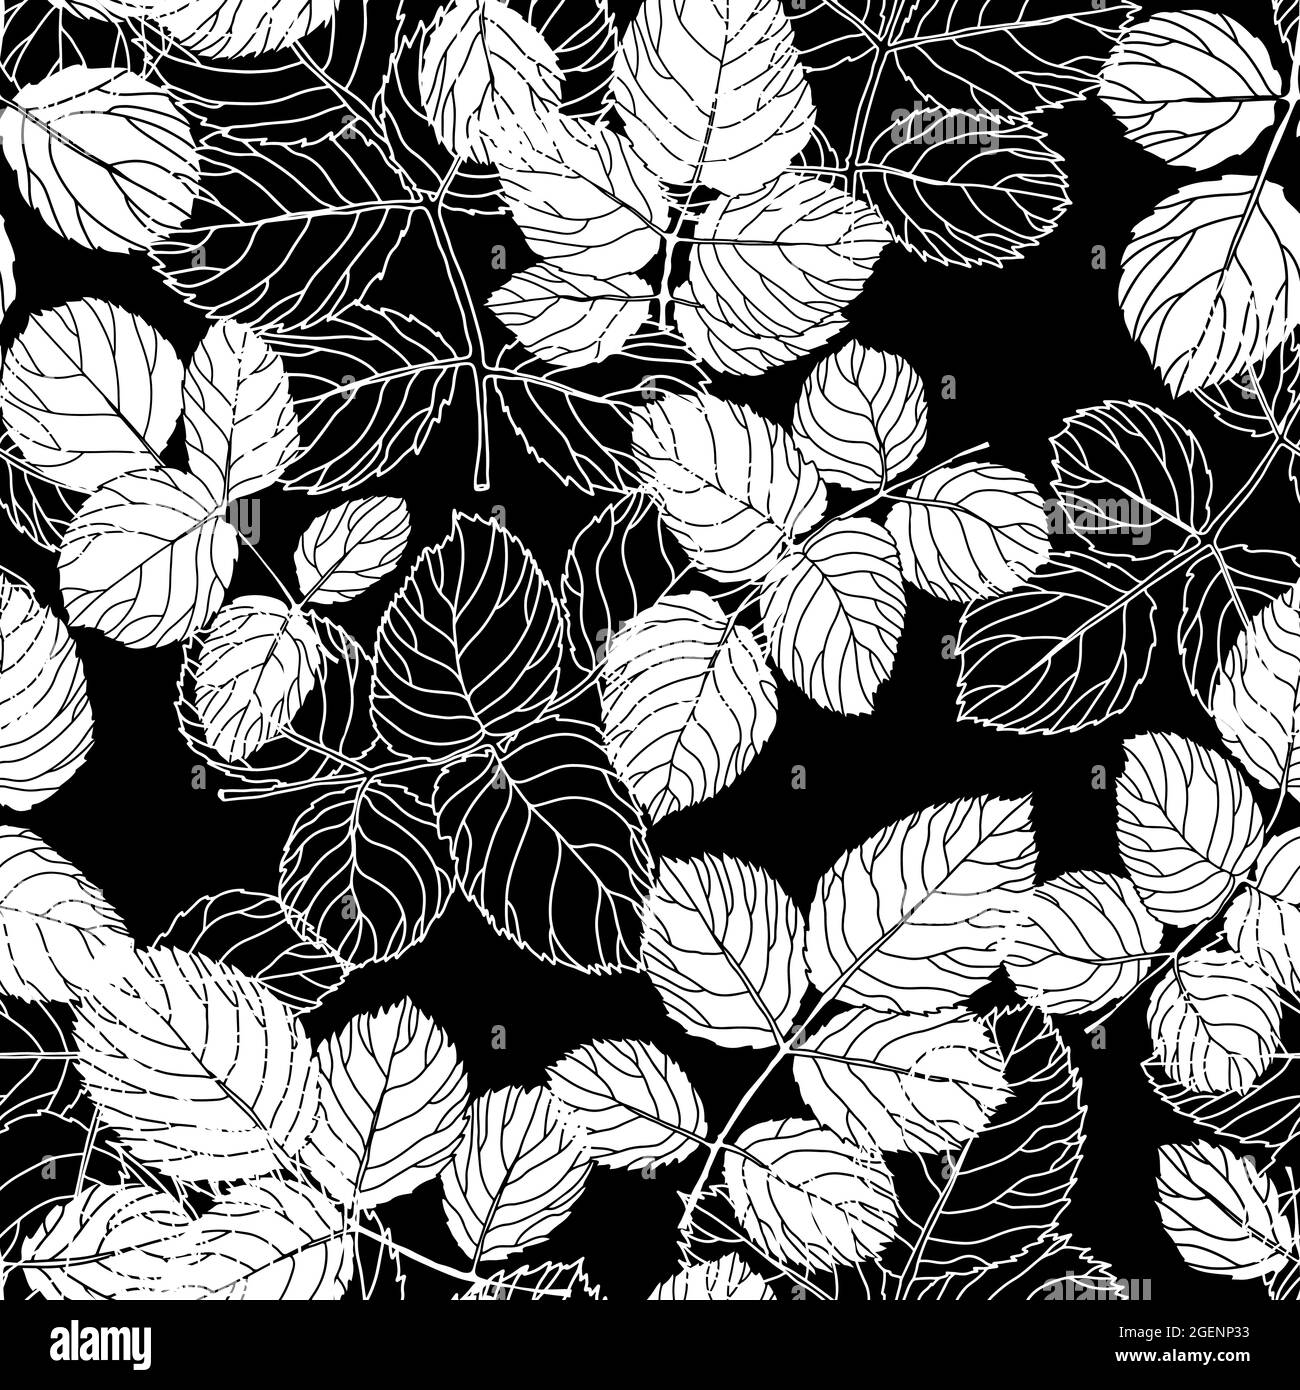 Botany leaves and foliage seamless pattern vector Stock Vector